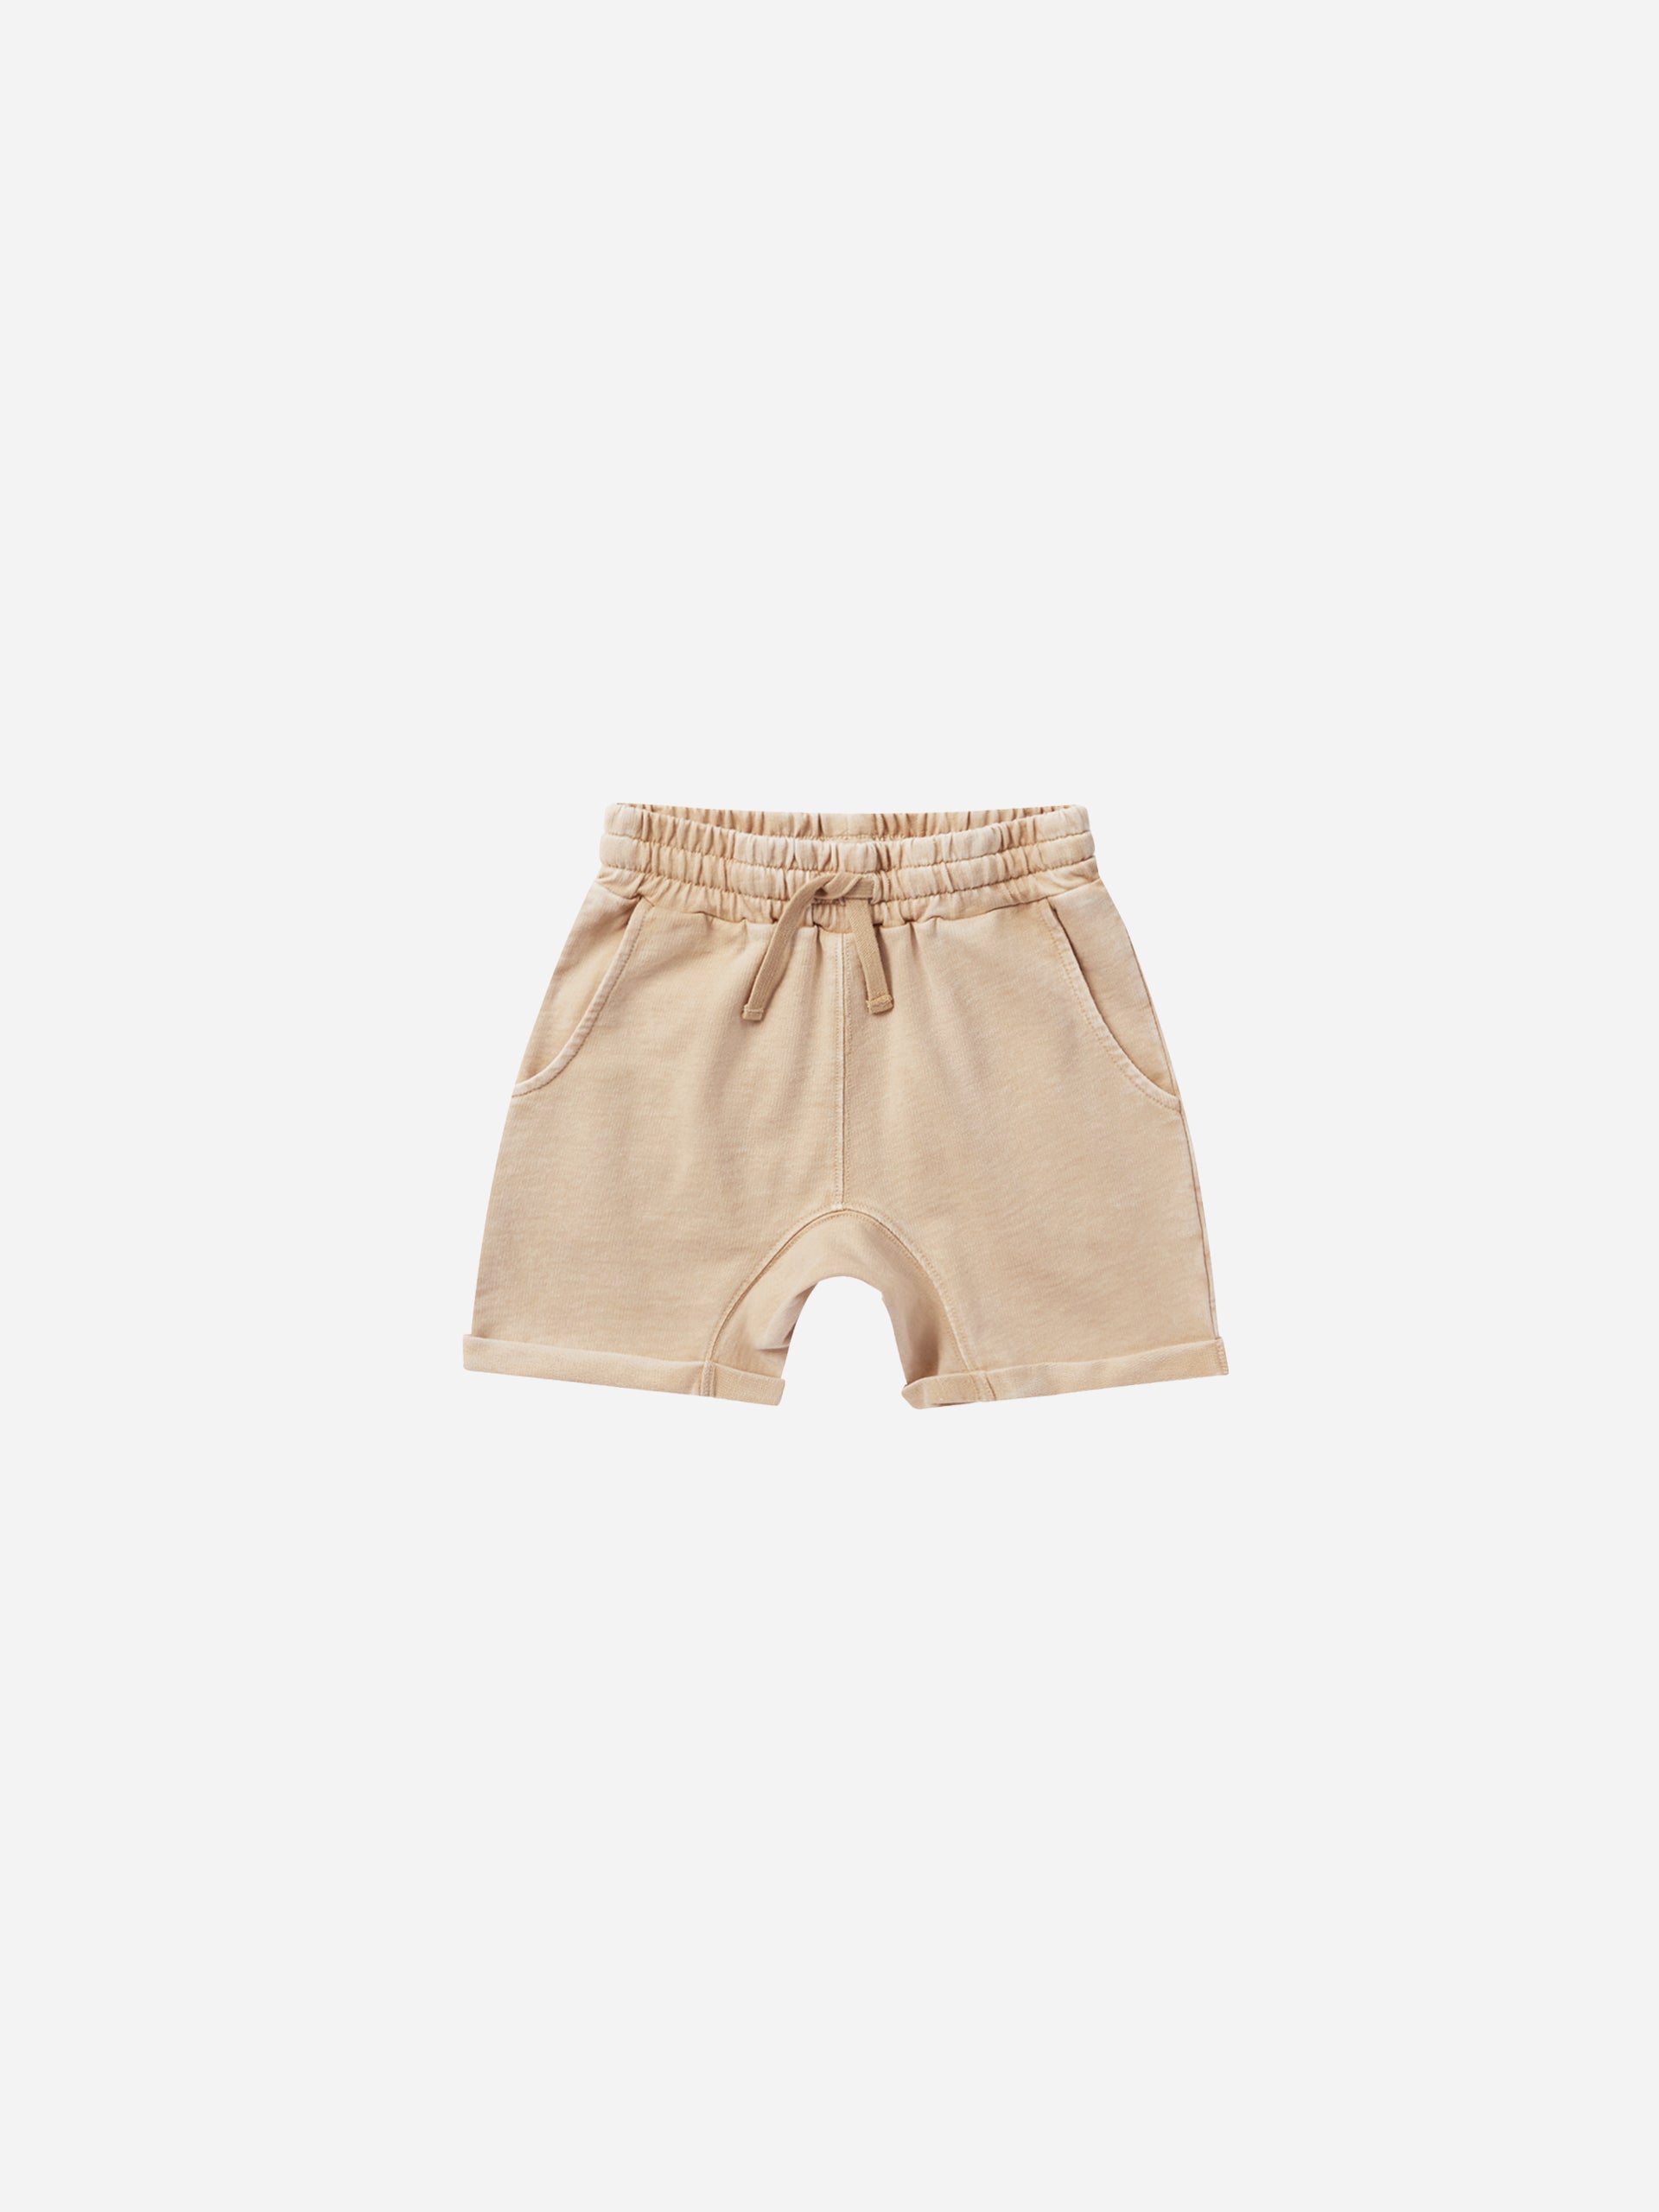 Relaxed Short || Oat - Rylee + Cru | Kids Clothes | Trendy Baby Clothes | Modern Infant Outfits |